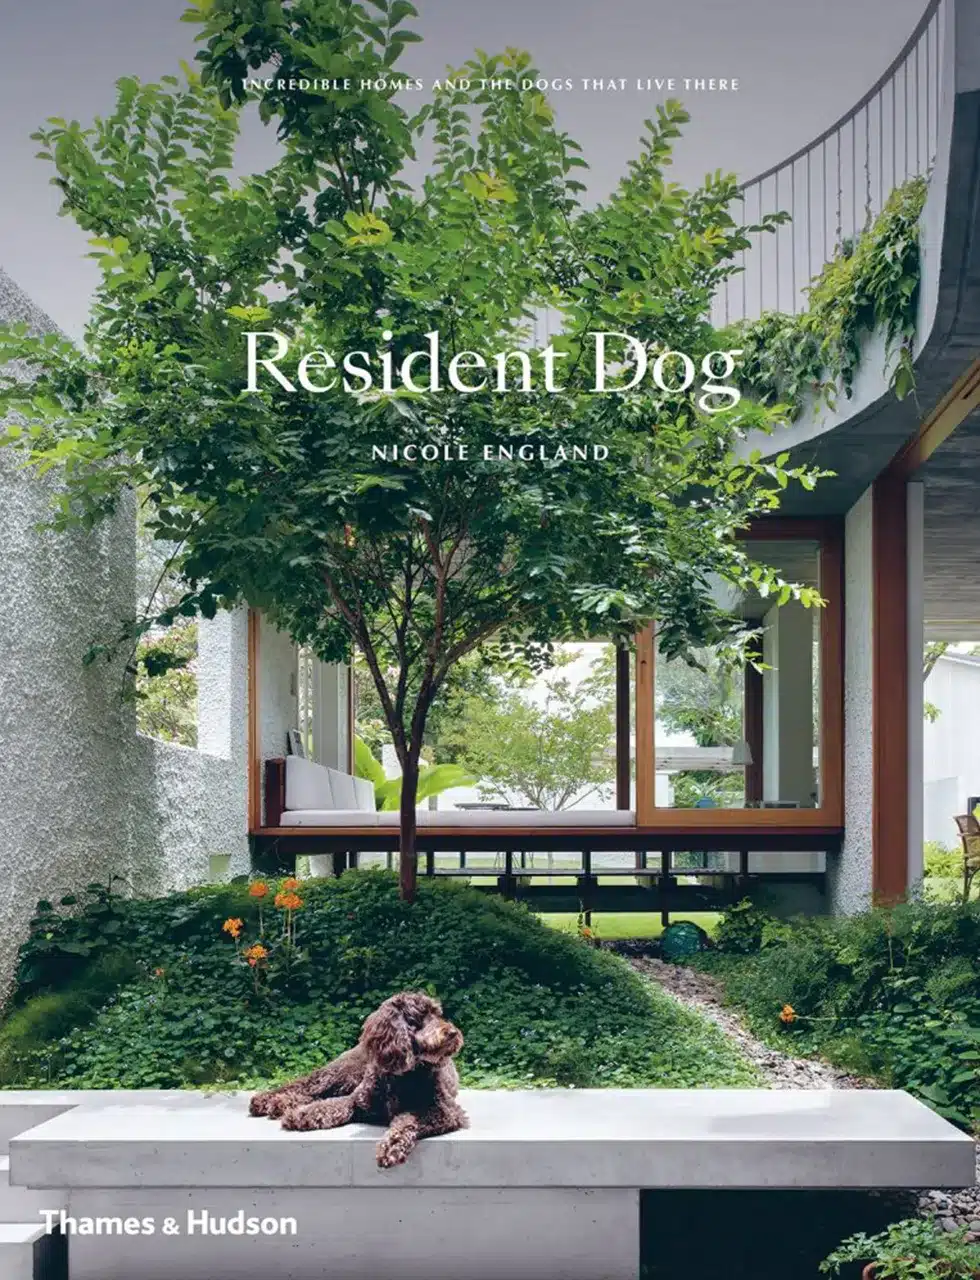 resident dog a heartwarming book exploring buildings and our dogs katharine pooley interior design